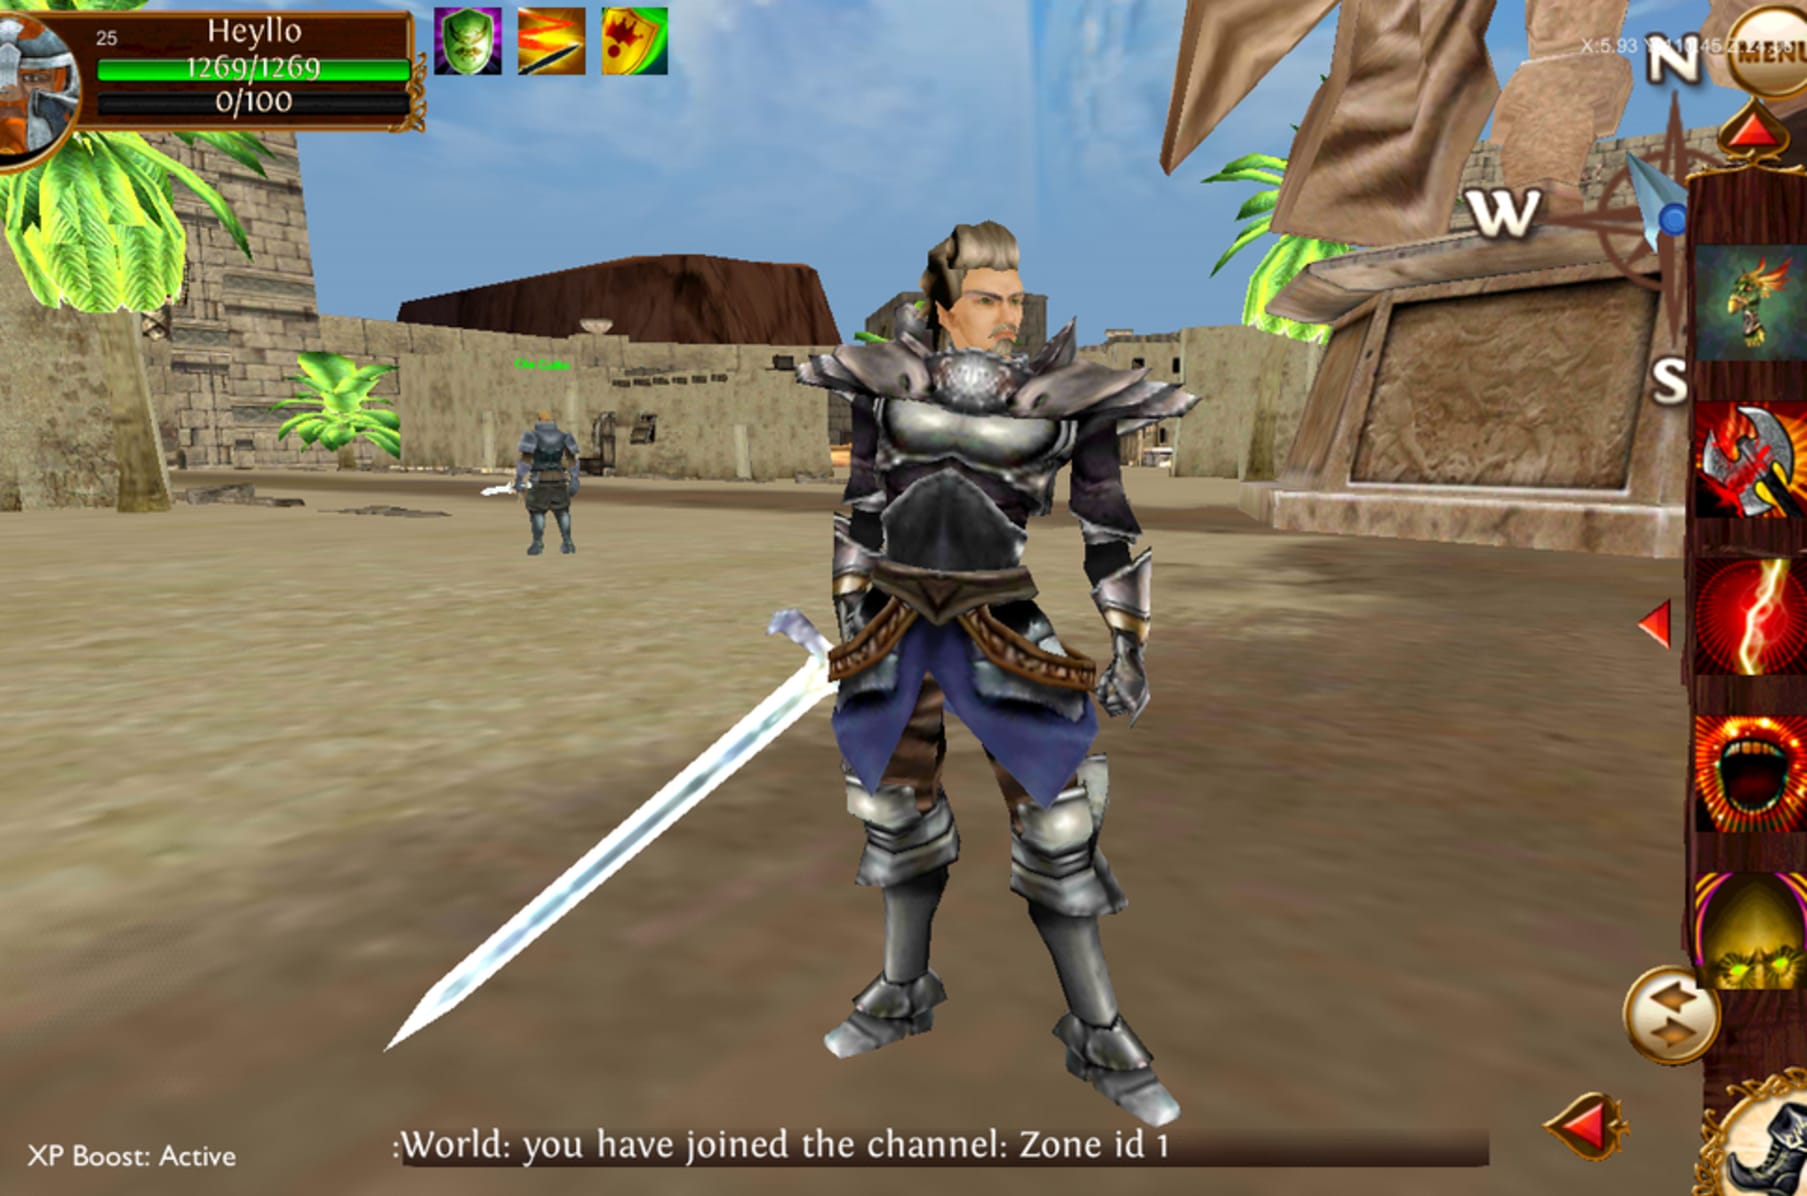 Sherwood Dungeon 3D MMO RPG – Apps no Google Play